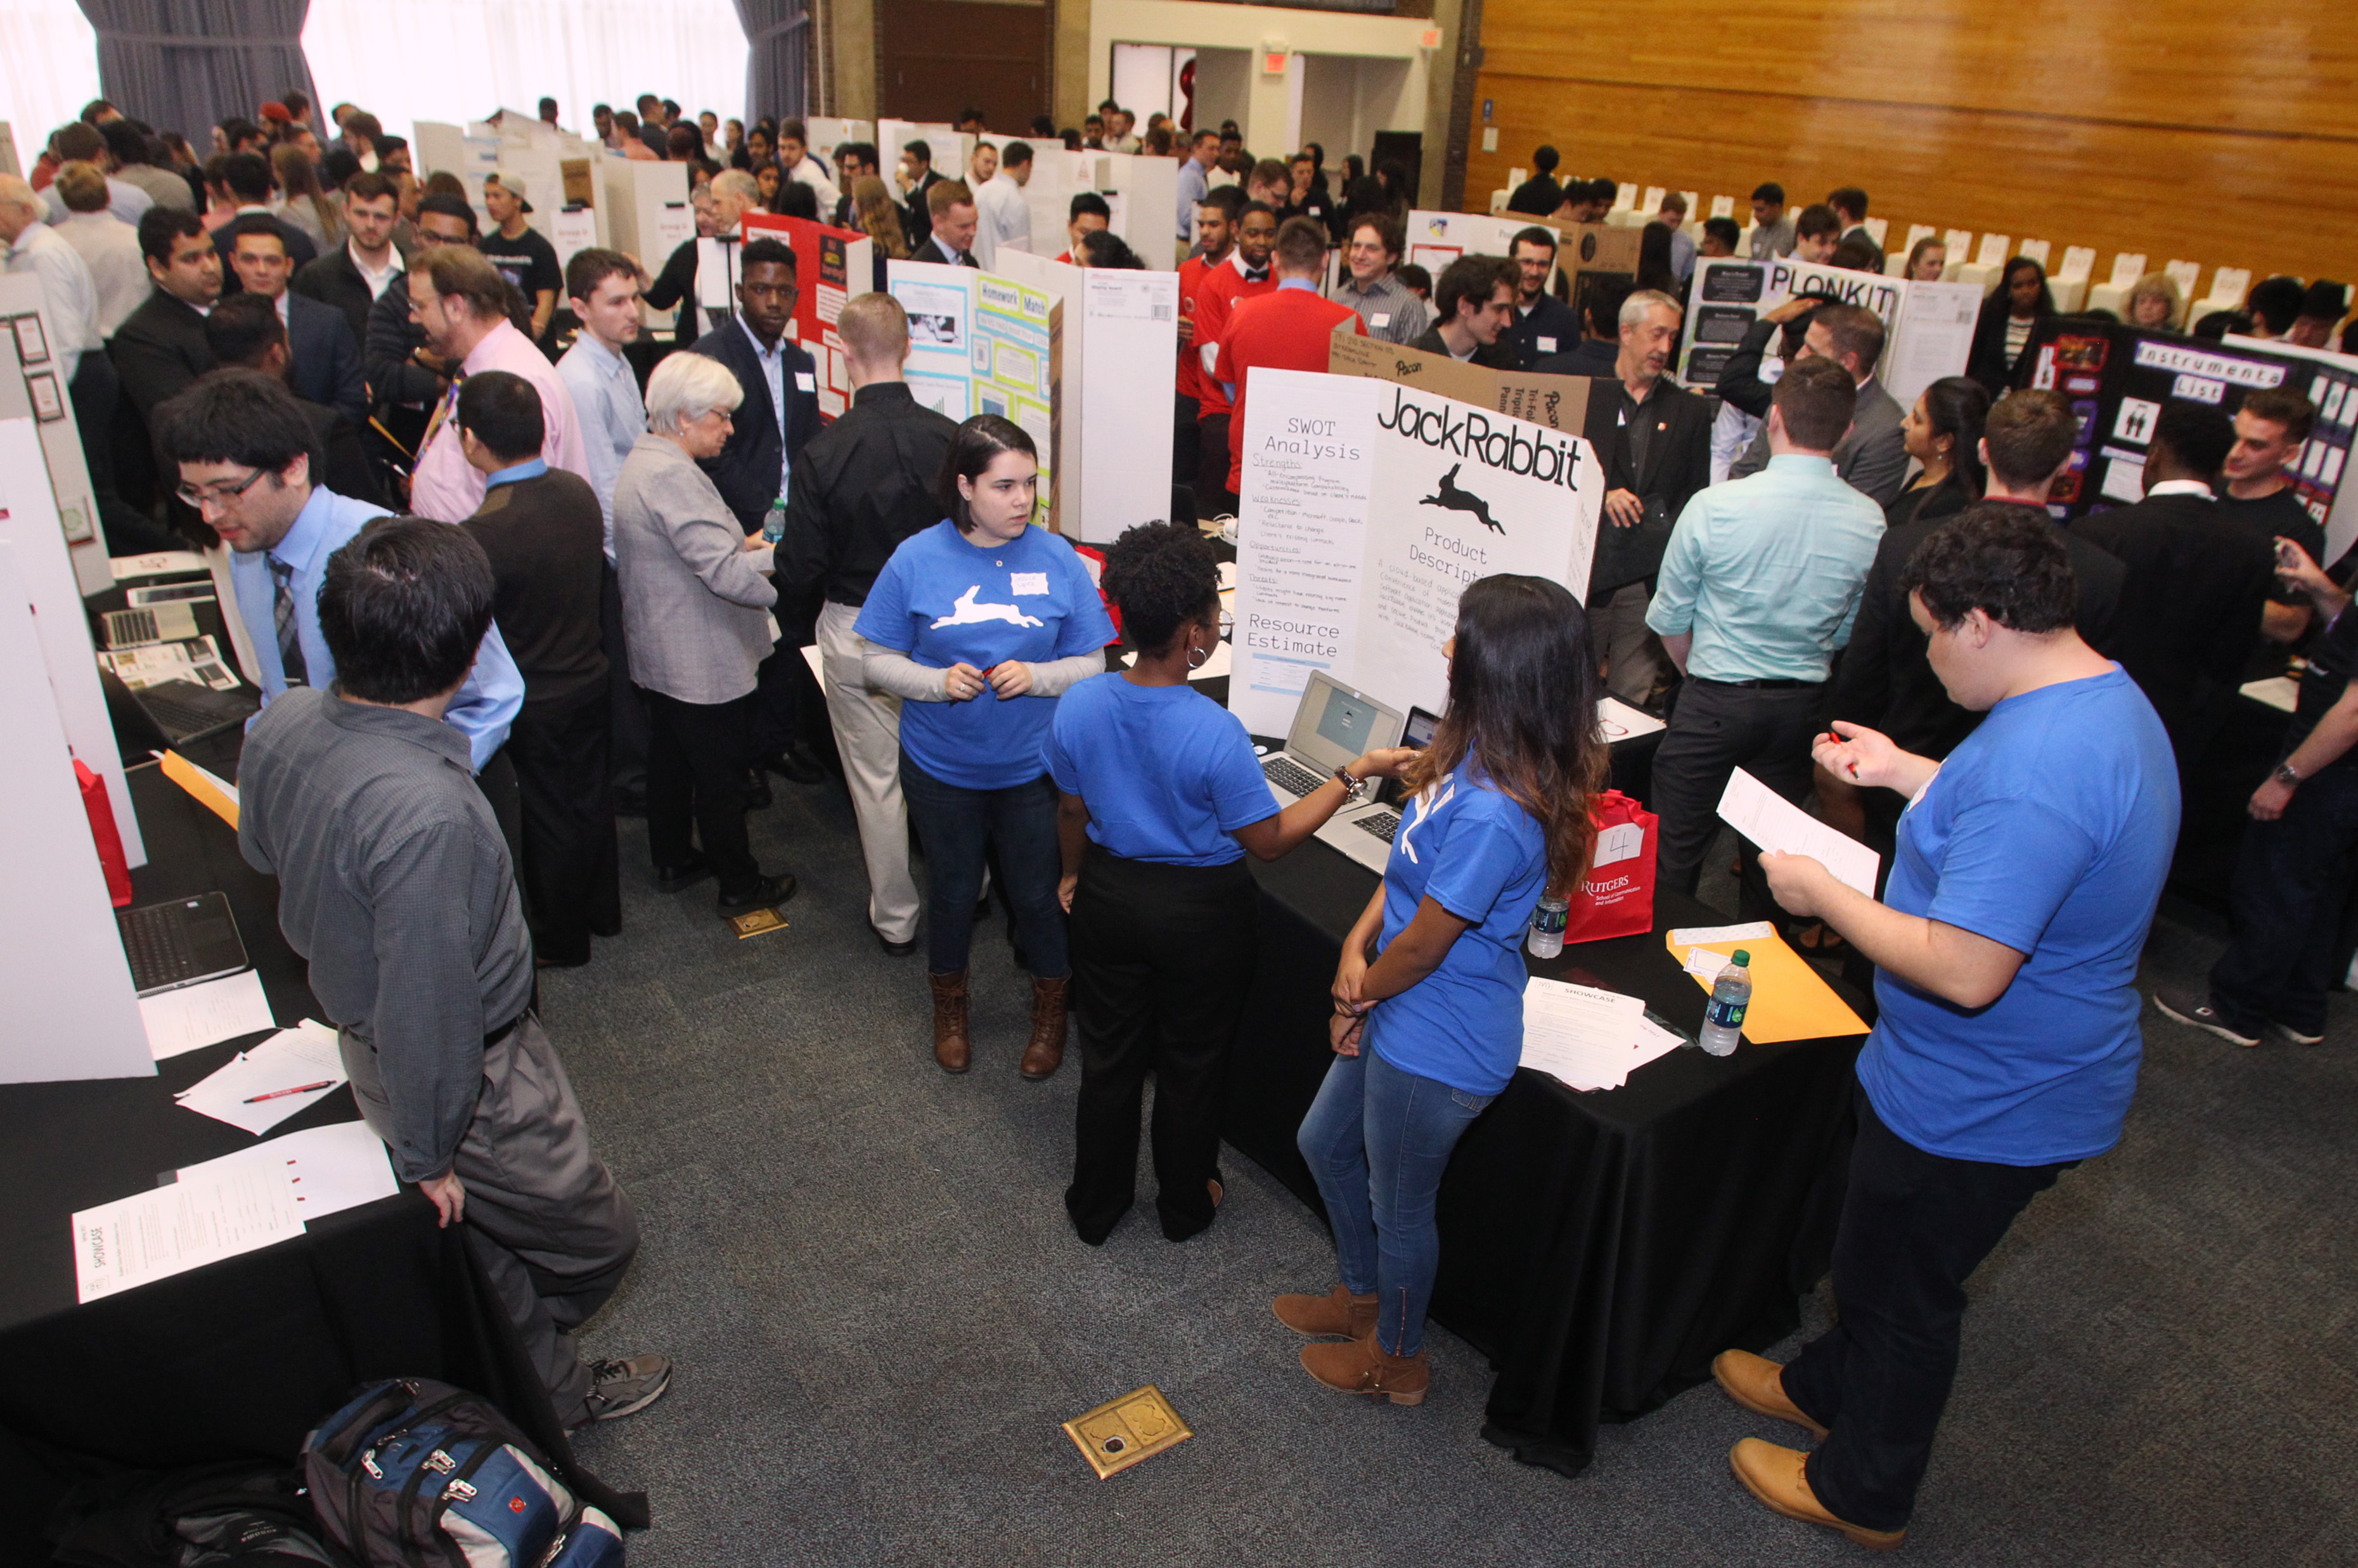 Management of Technological Organizations class and Capstone students present their technology based projects at the ITI Showcase – Spring 2017 